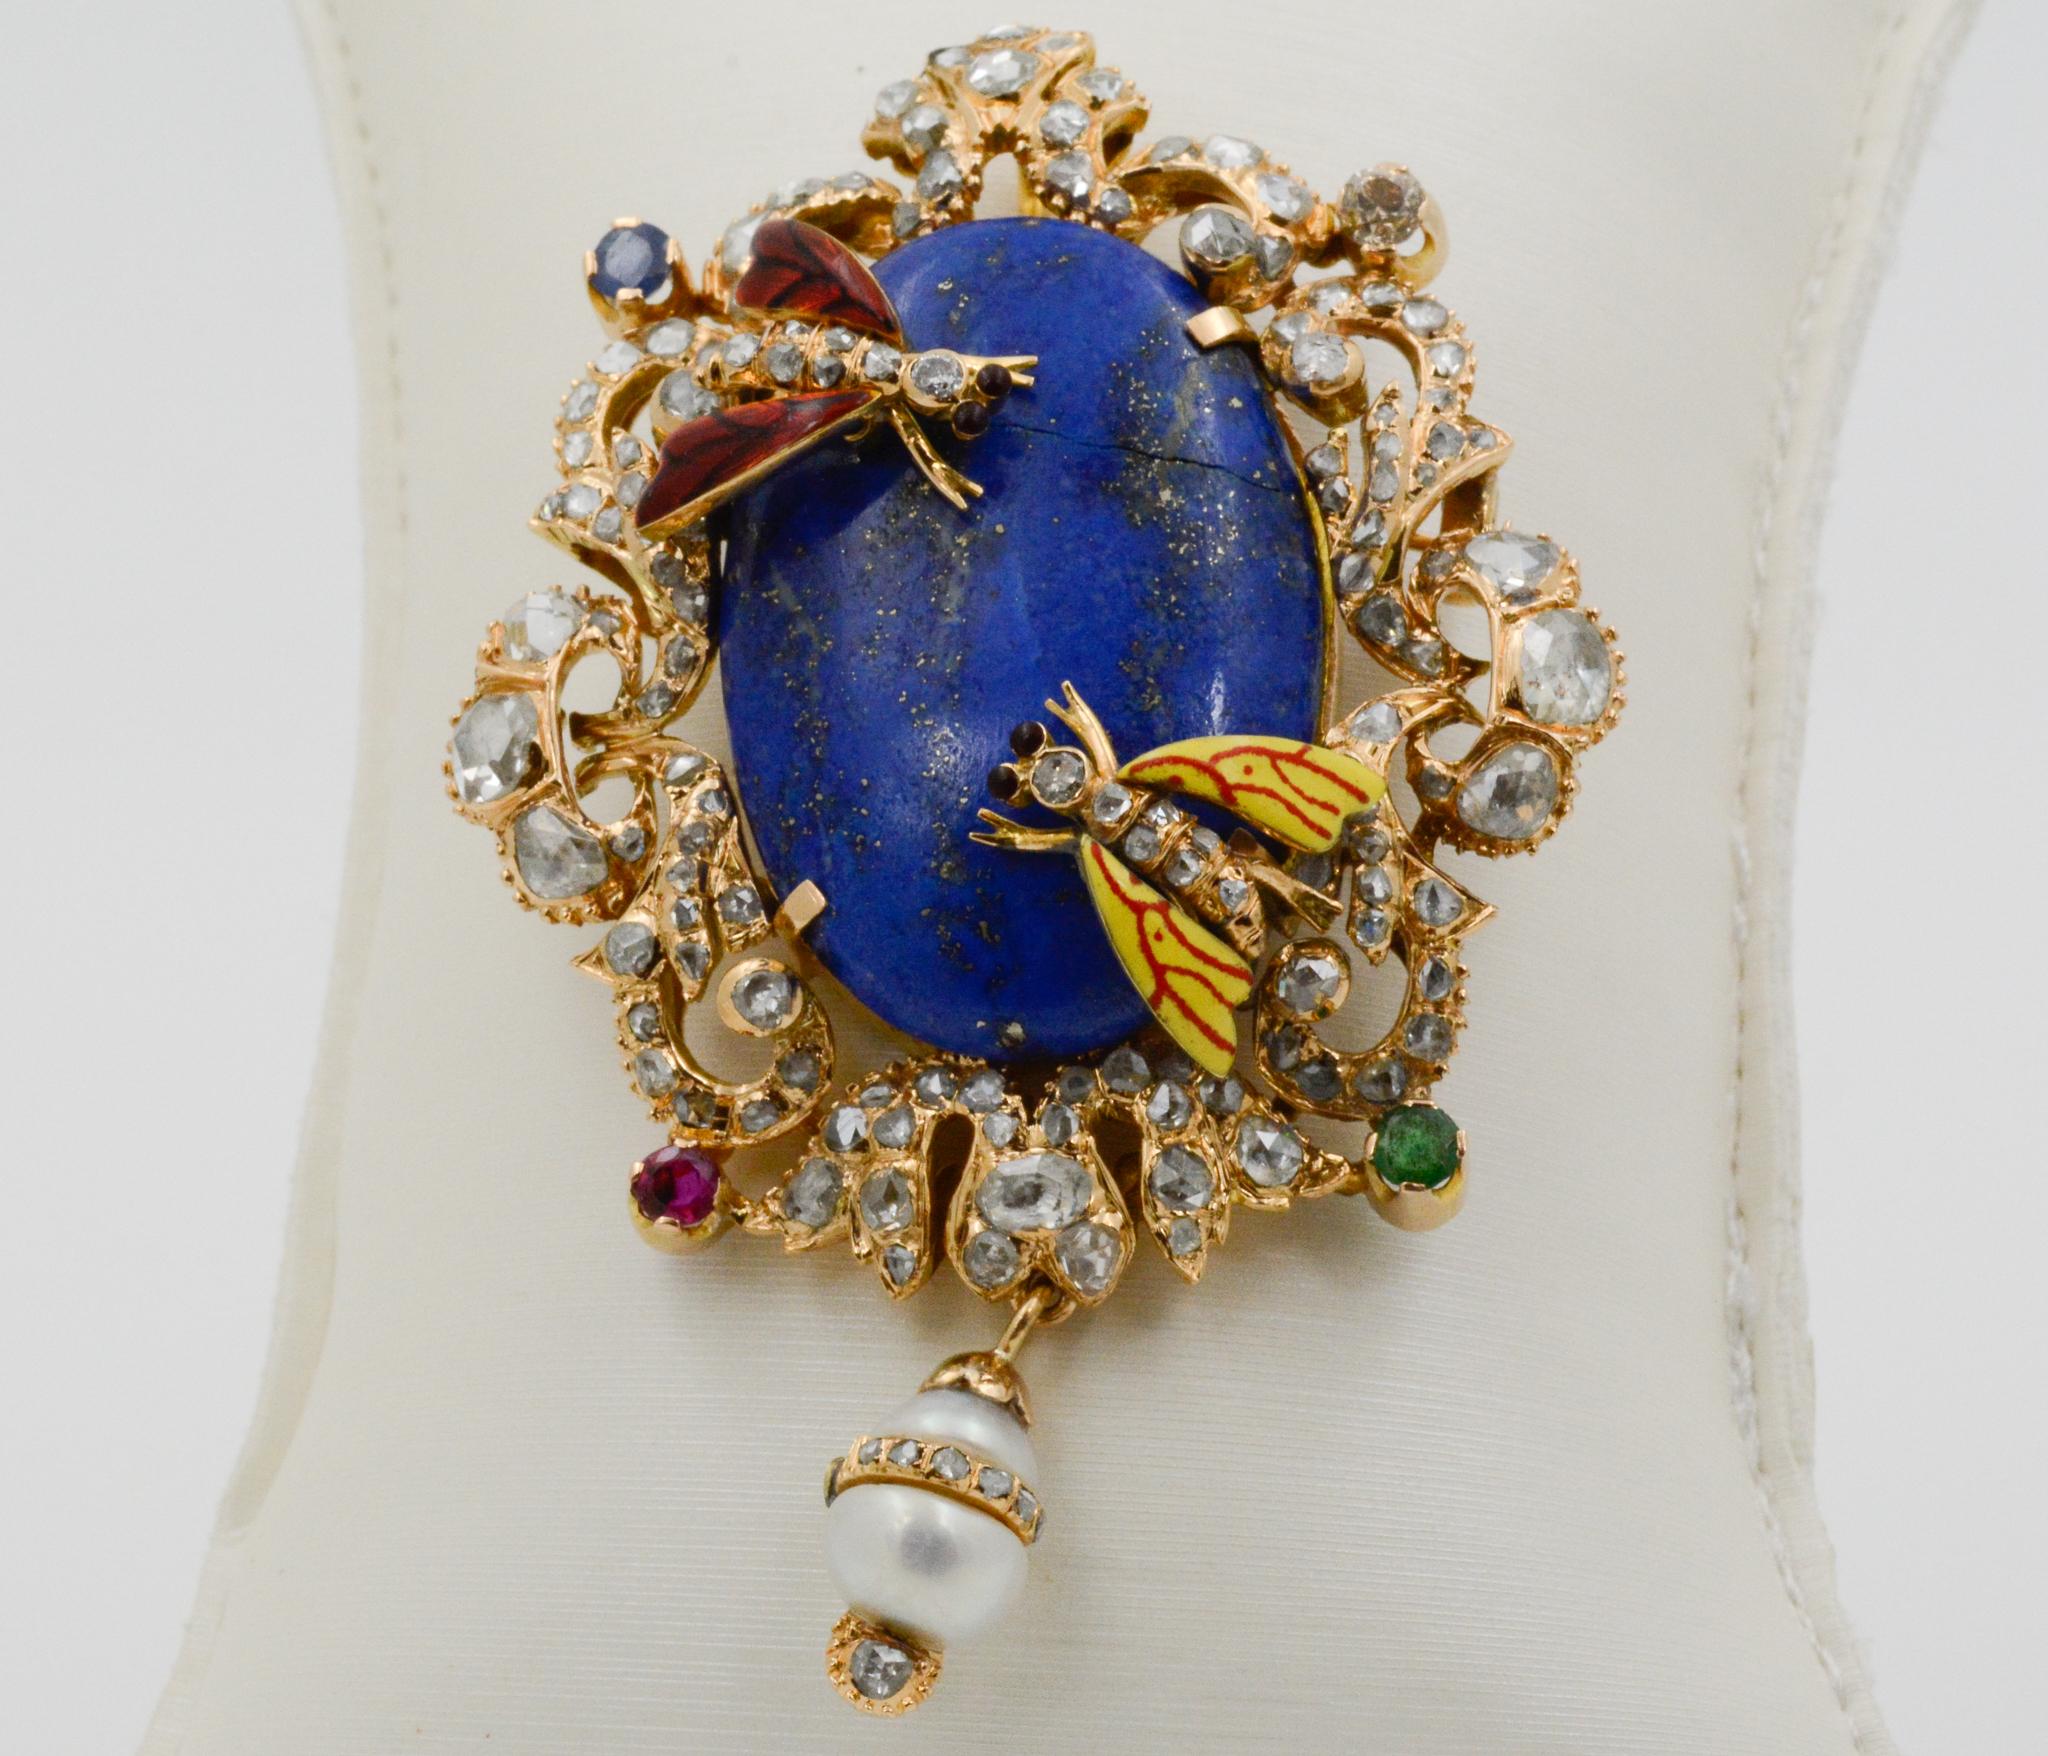 Exclusively from the Eiseman Estate Jewelry Collection, this early Victorian era Middle Eastern 14k yellow gold pin features a center oval lapis, 32.42x21.6mm. Surrounding the lapis is 3.00ctw of rose cut diamonds, J-K SI, one ruby (.30ctw), one